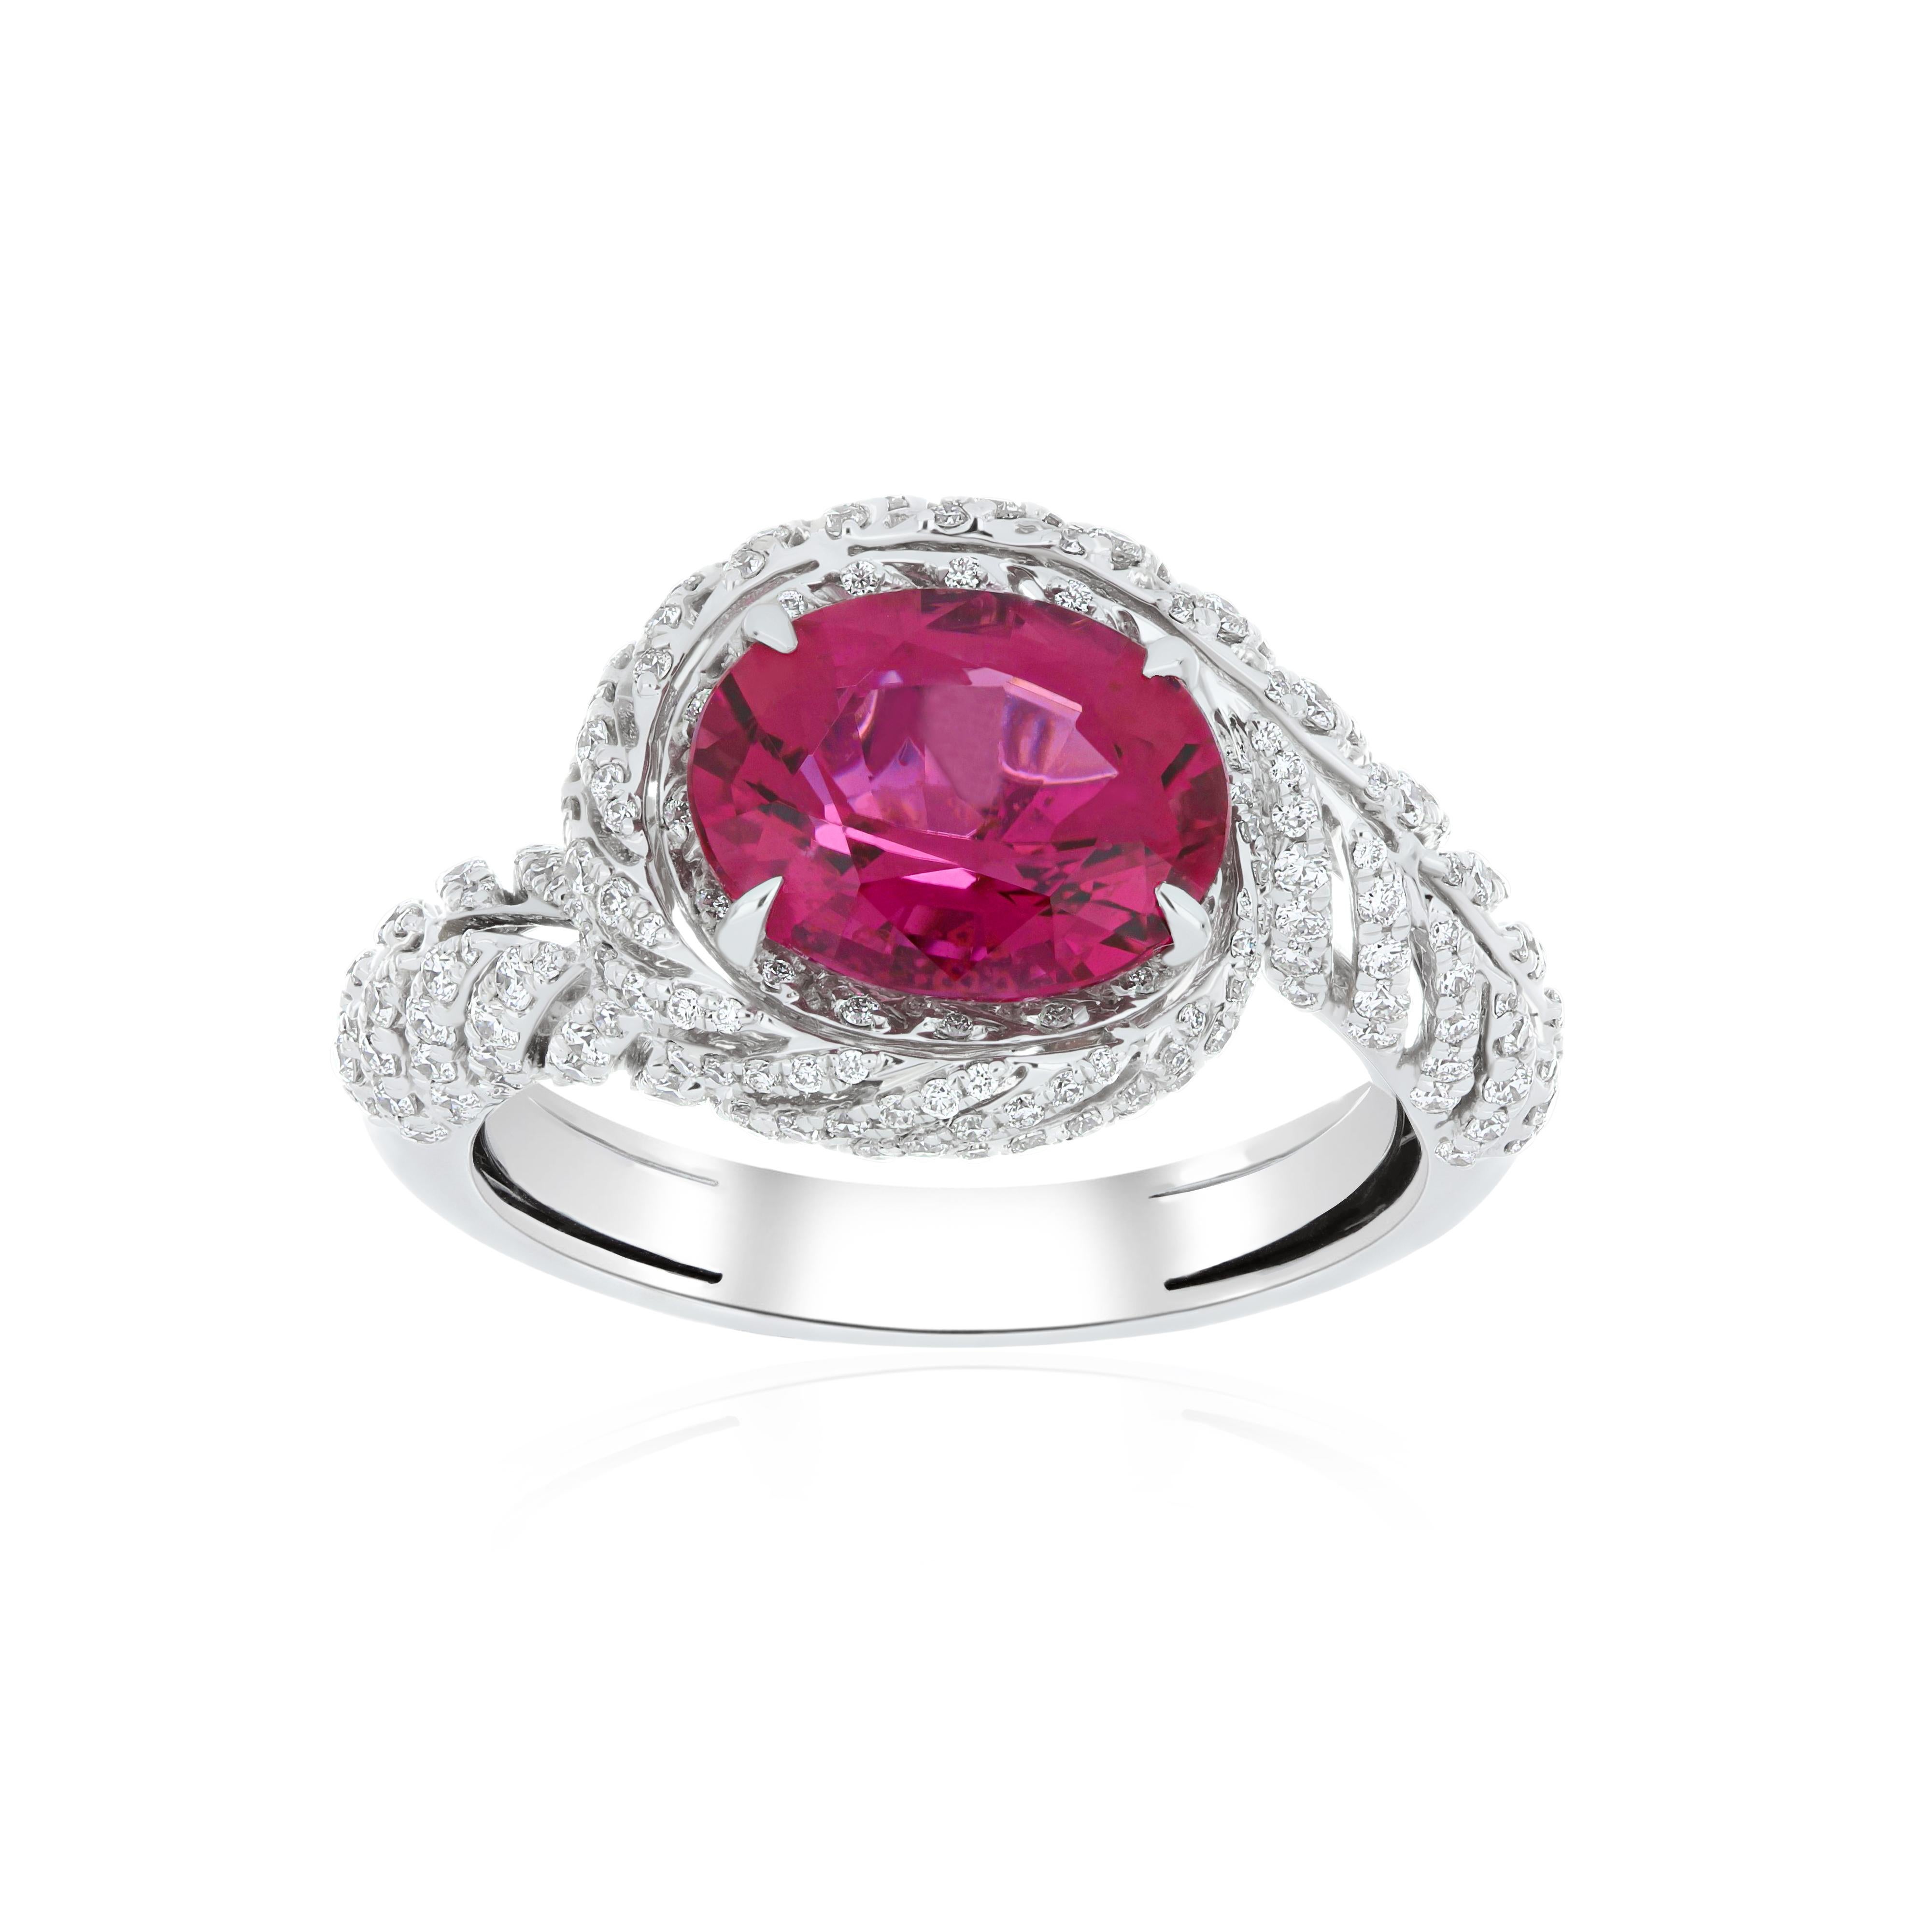 Oval Cut 3.2 Carat Rubellite and Diamond Studded Ring in 18K White Gold Ring For Sale